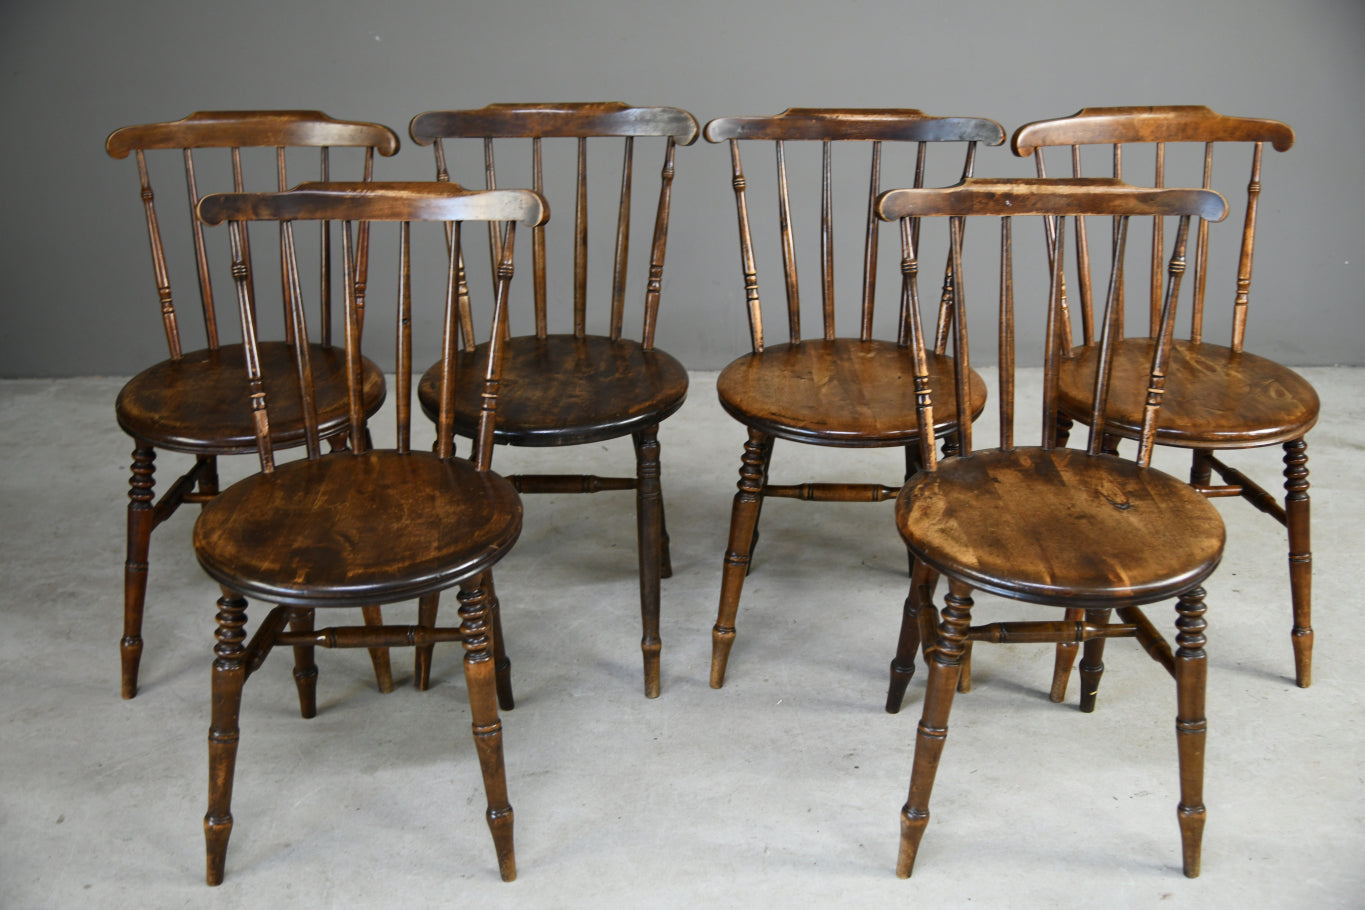 6 Antique Ibex Penny Chairs